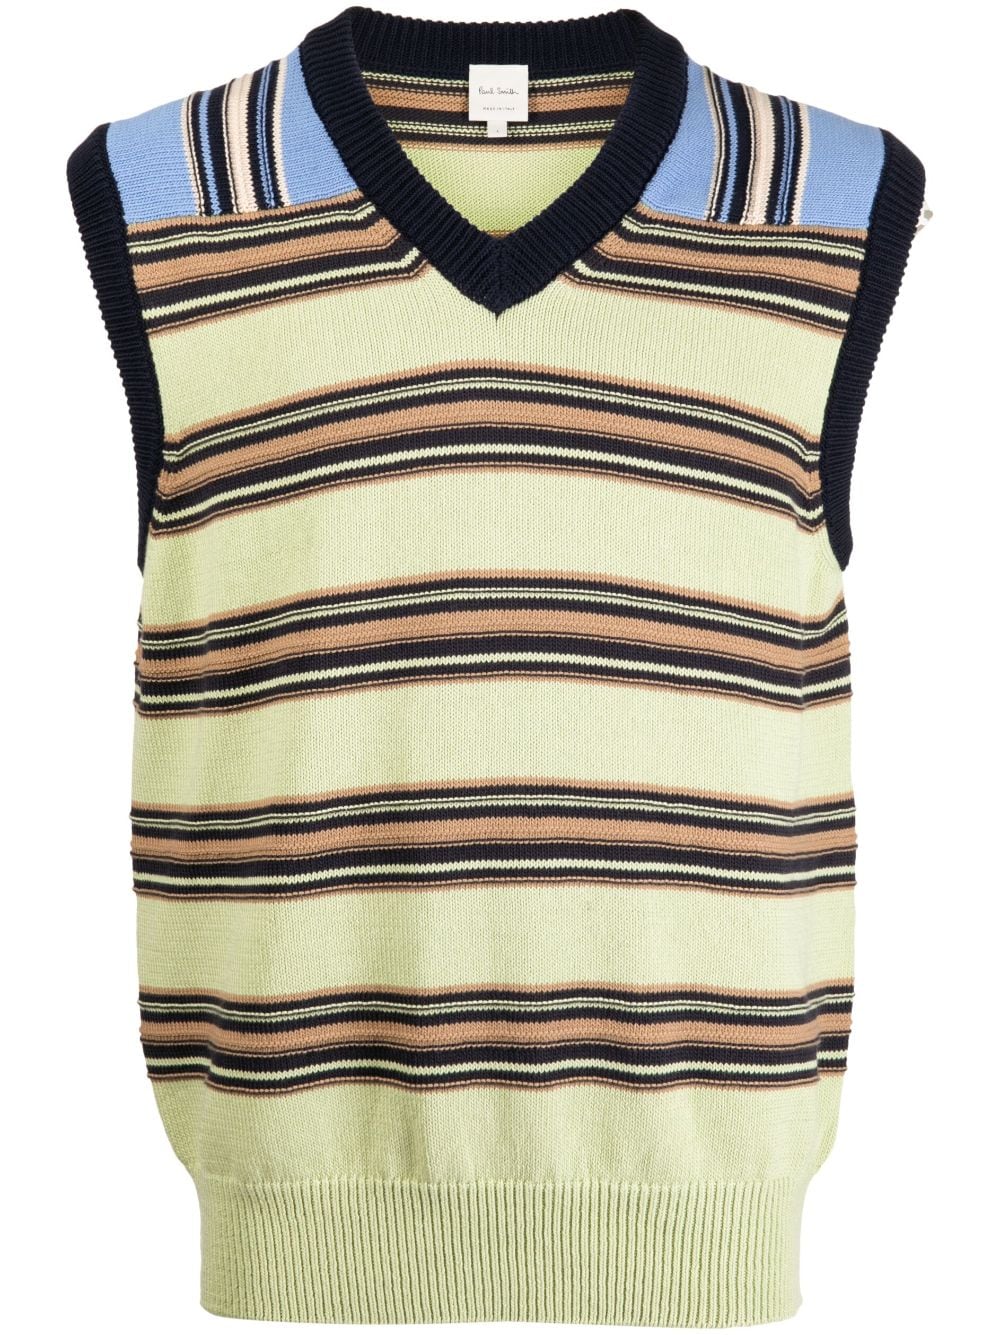 PAUL SMITH STRIPED SLEEVELESS KNITTED VEST